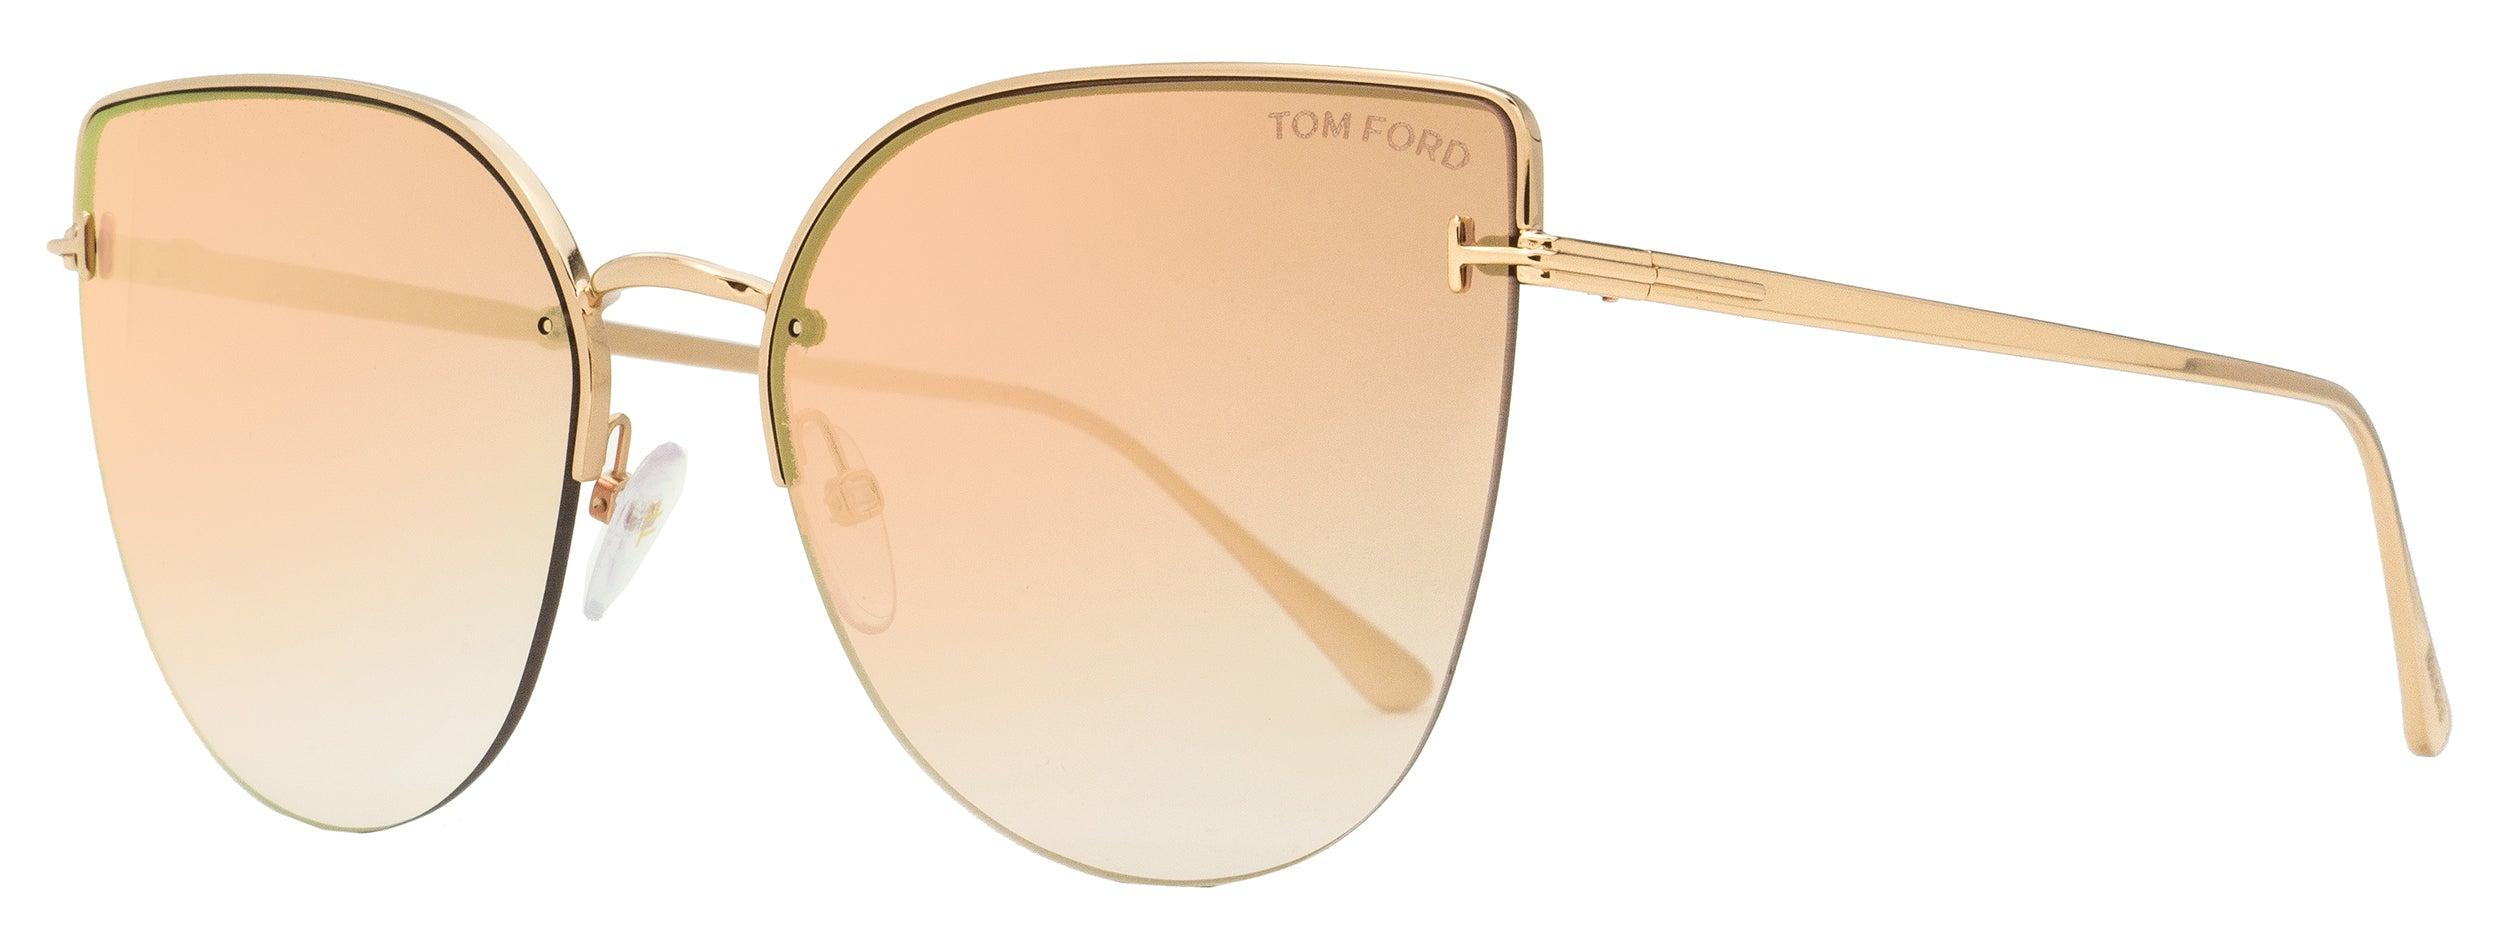 Tom Ford Butterfly Sunglasses Tf652 Ingrid-02 Gold 60mm in Black | Lyst